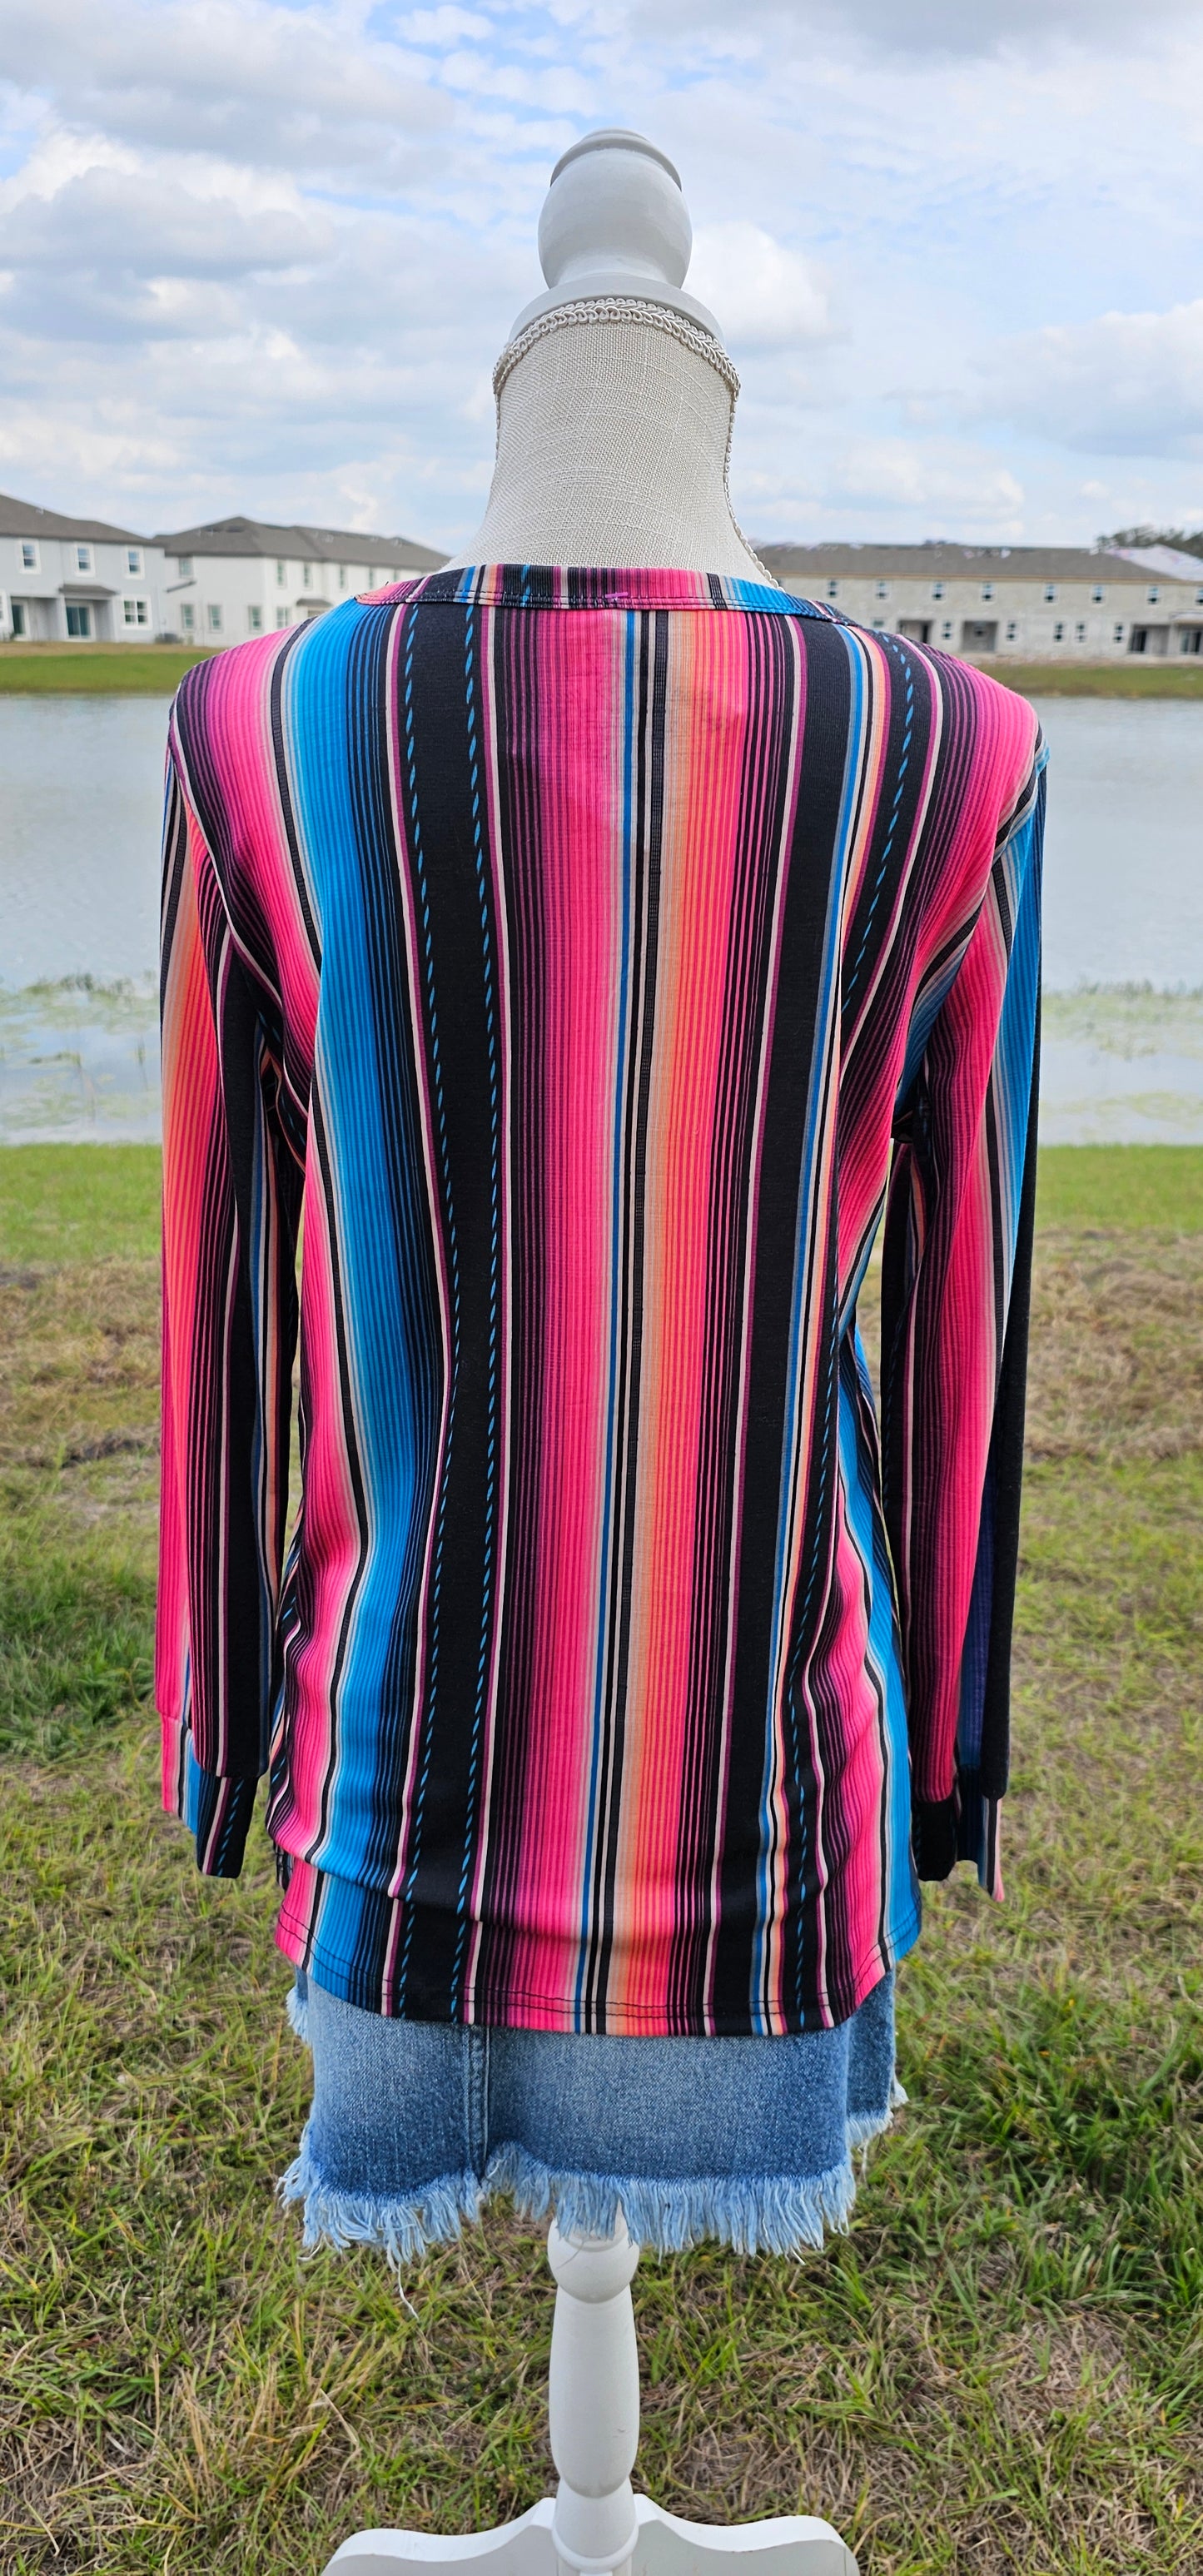 Imagine yourself in this  long sleeve bright colored top that has a black mesh V cut-out.  The sleeves offer a cuff for that nice fit. The bright colors really make this top pop. Going to the rodeo, line dancing, hanging out with family and friends, or just because, this top will be a great addition to your wardrobe. Sizes small through x-large.